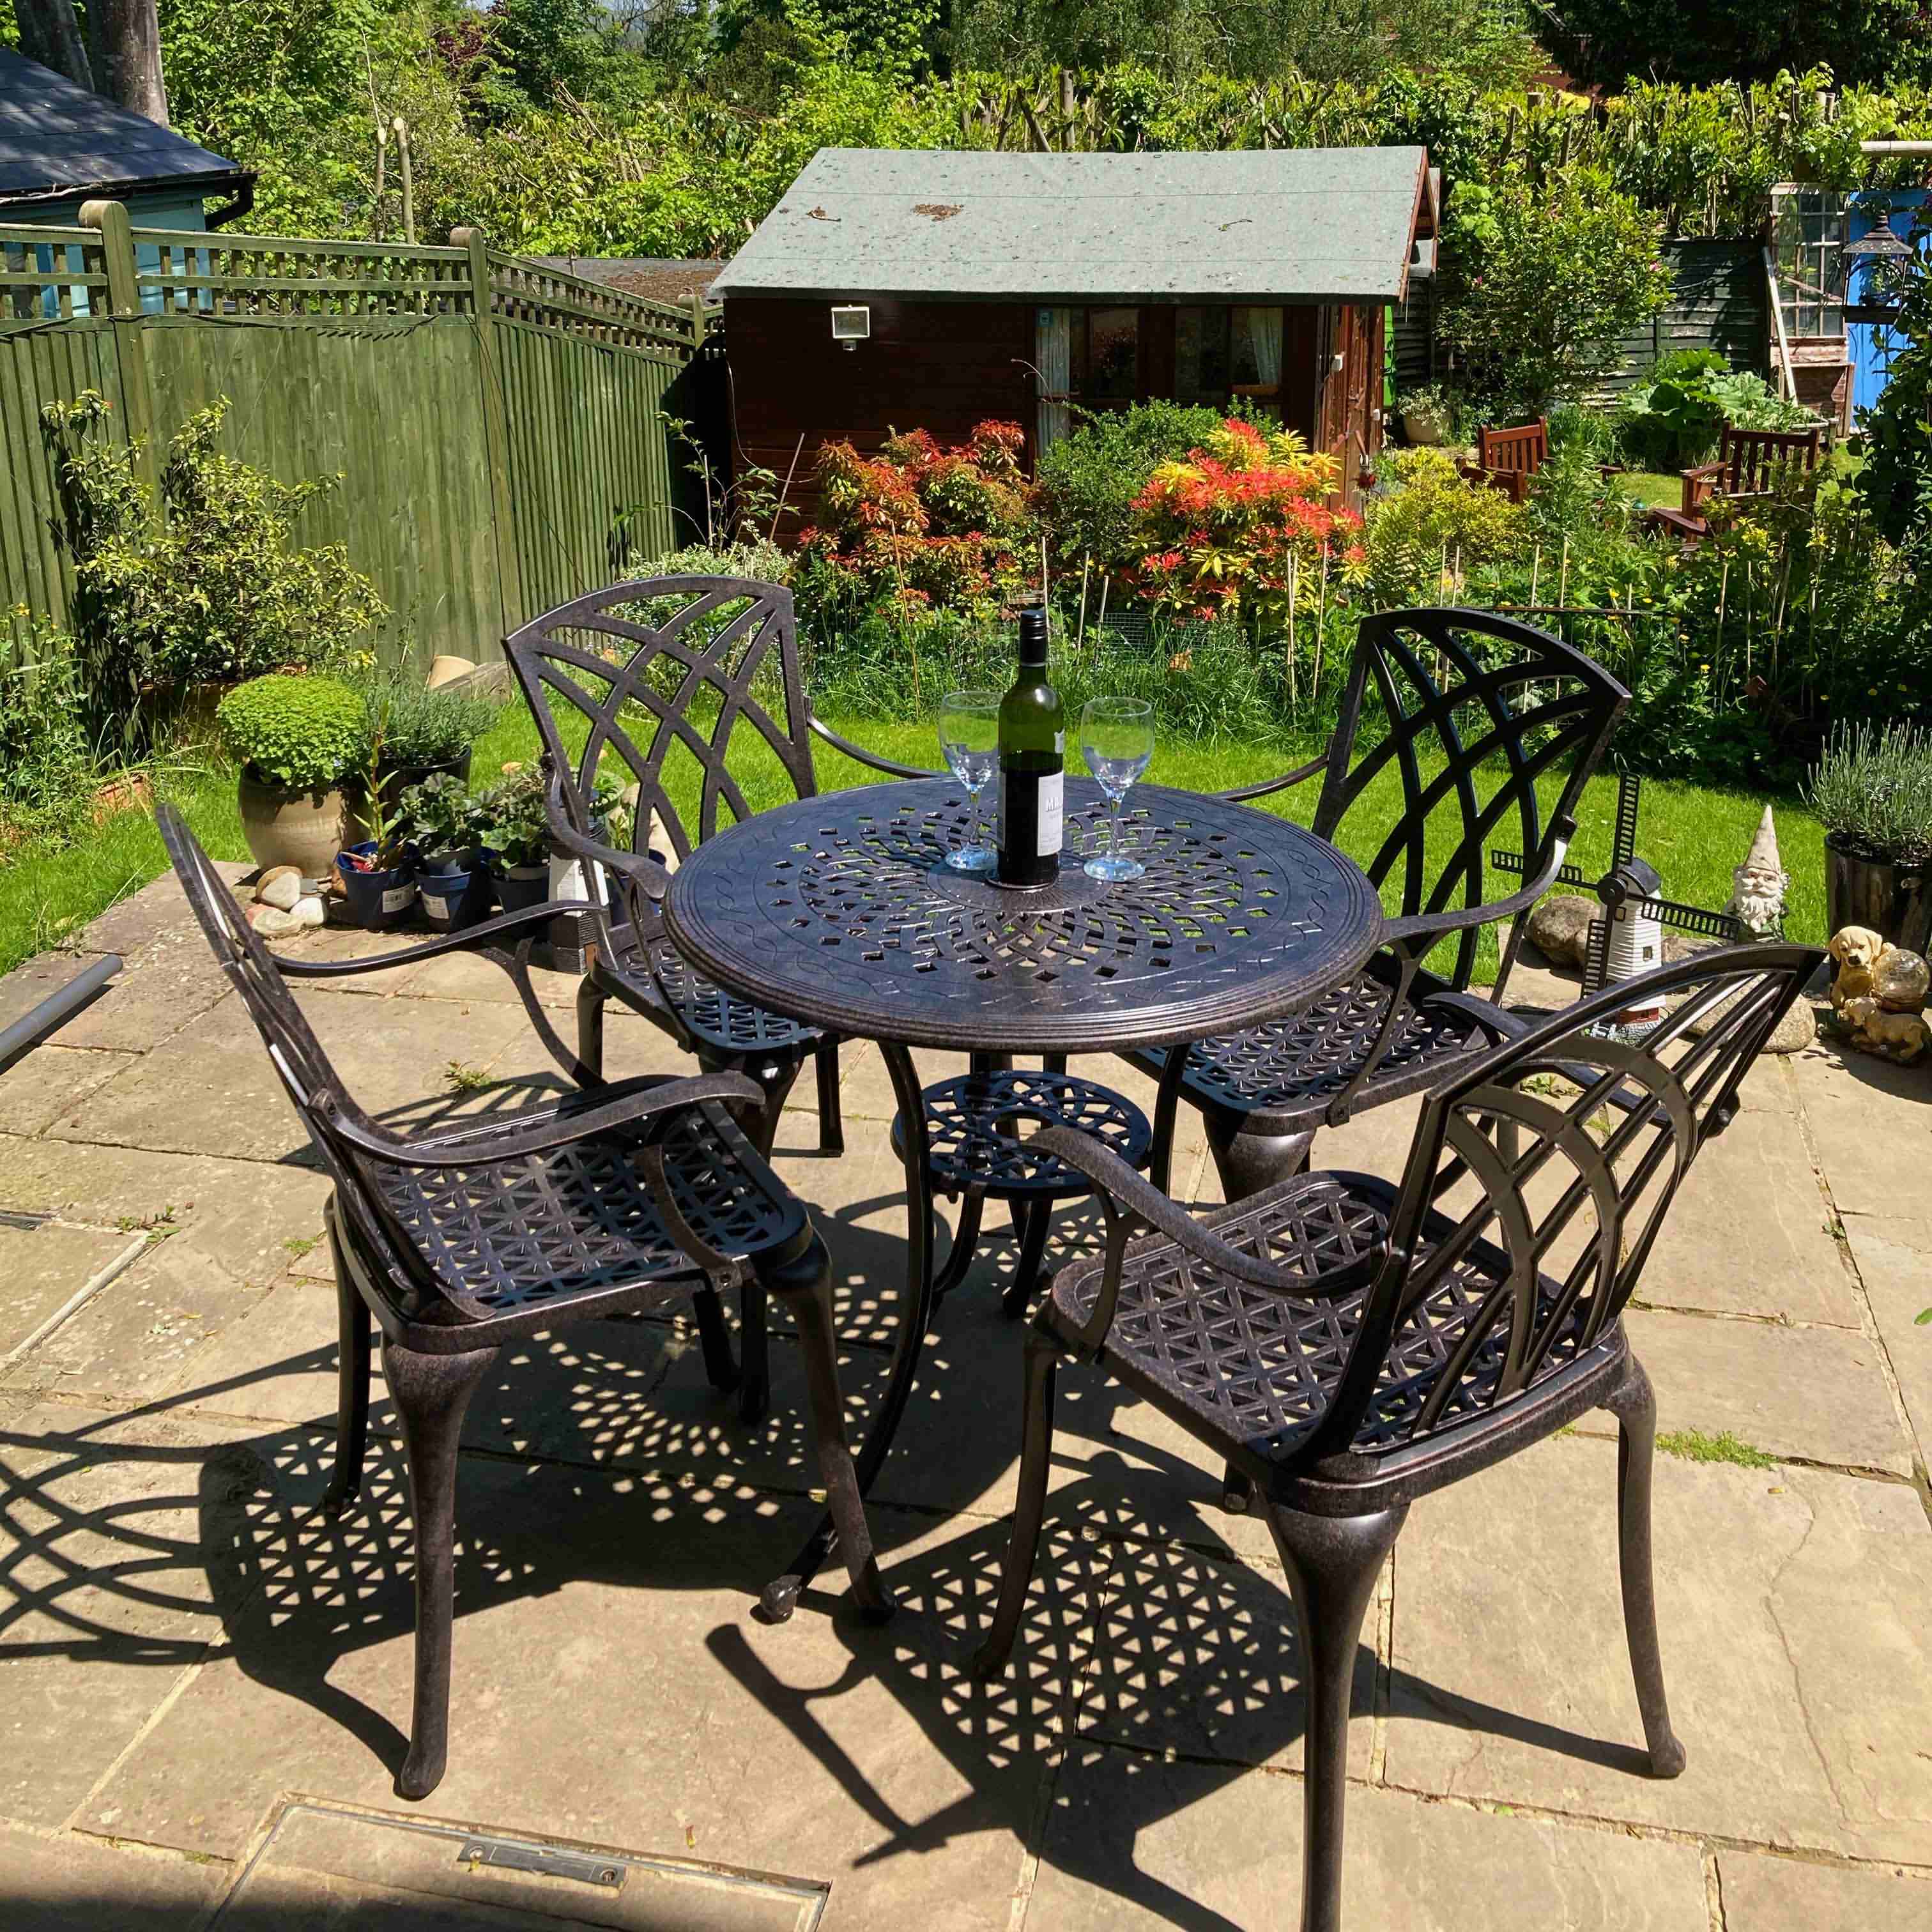 & | 4 Table Set Small Patio Chairs Anna Bronze Susan Lazy -